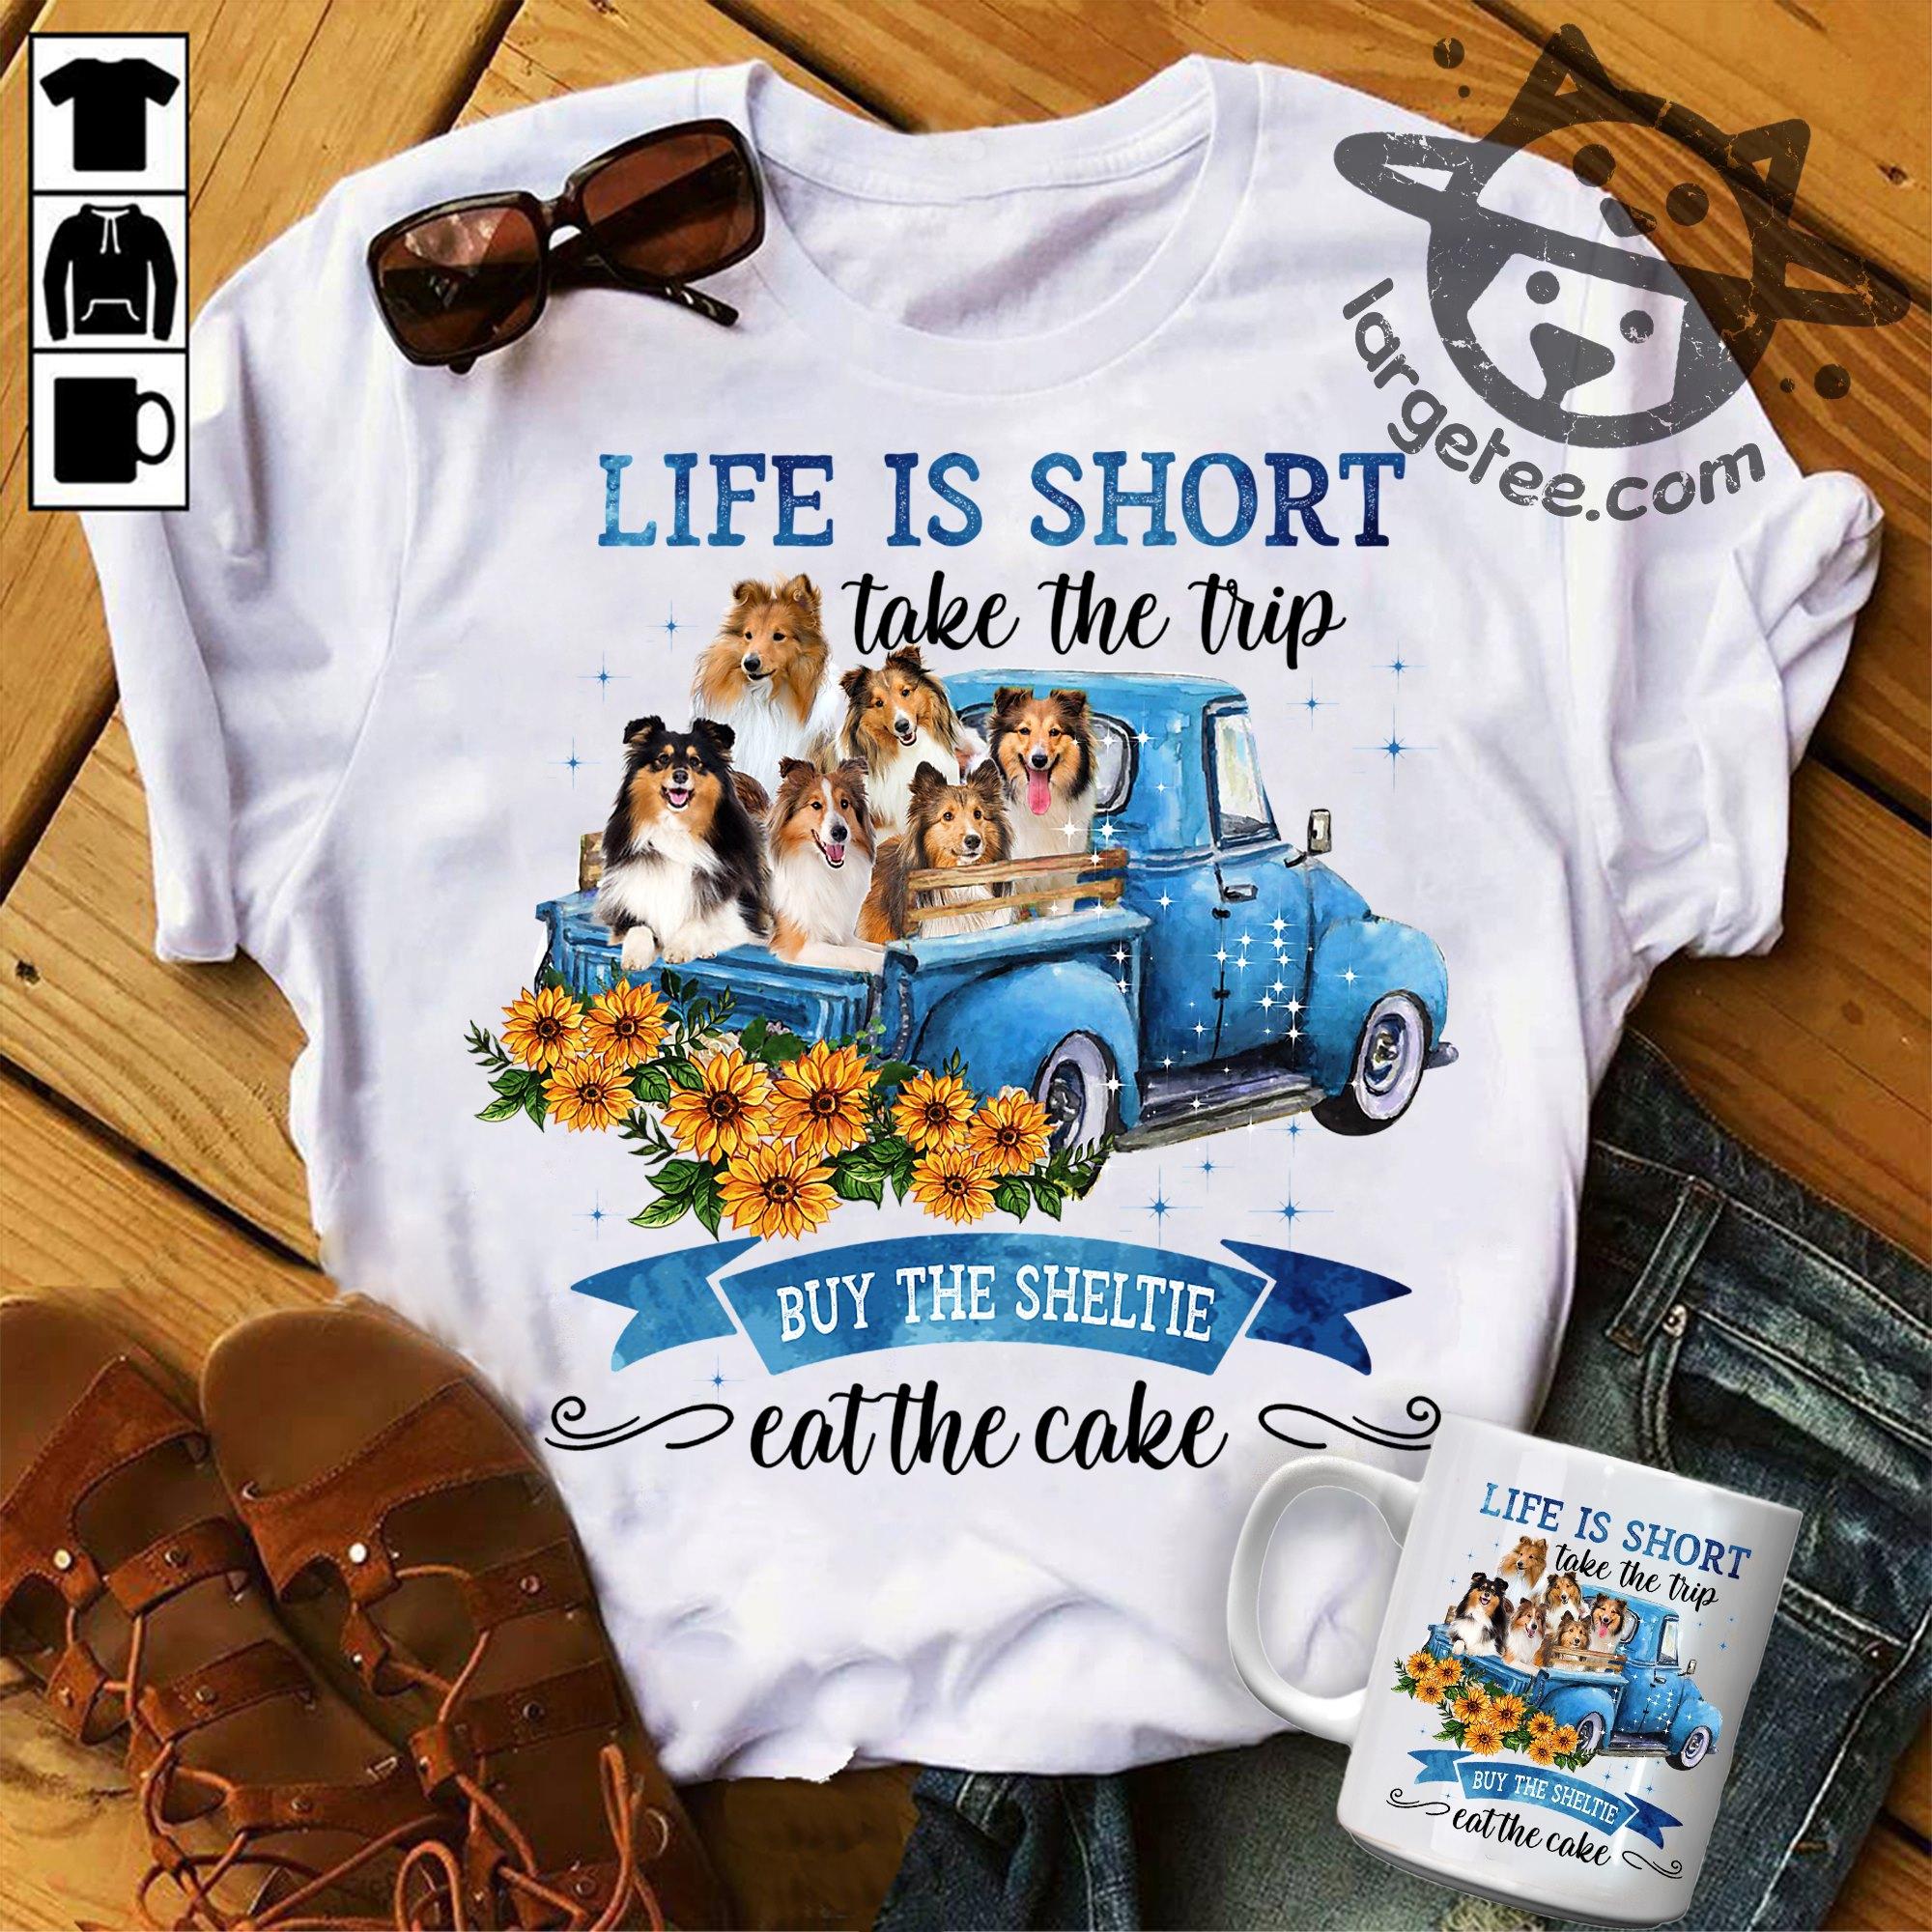 Shetland Sheepdog Tractor - Life is short take the trip buy the sheltie eat the cake